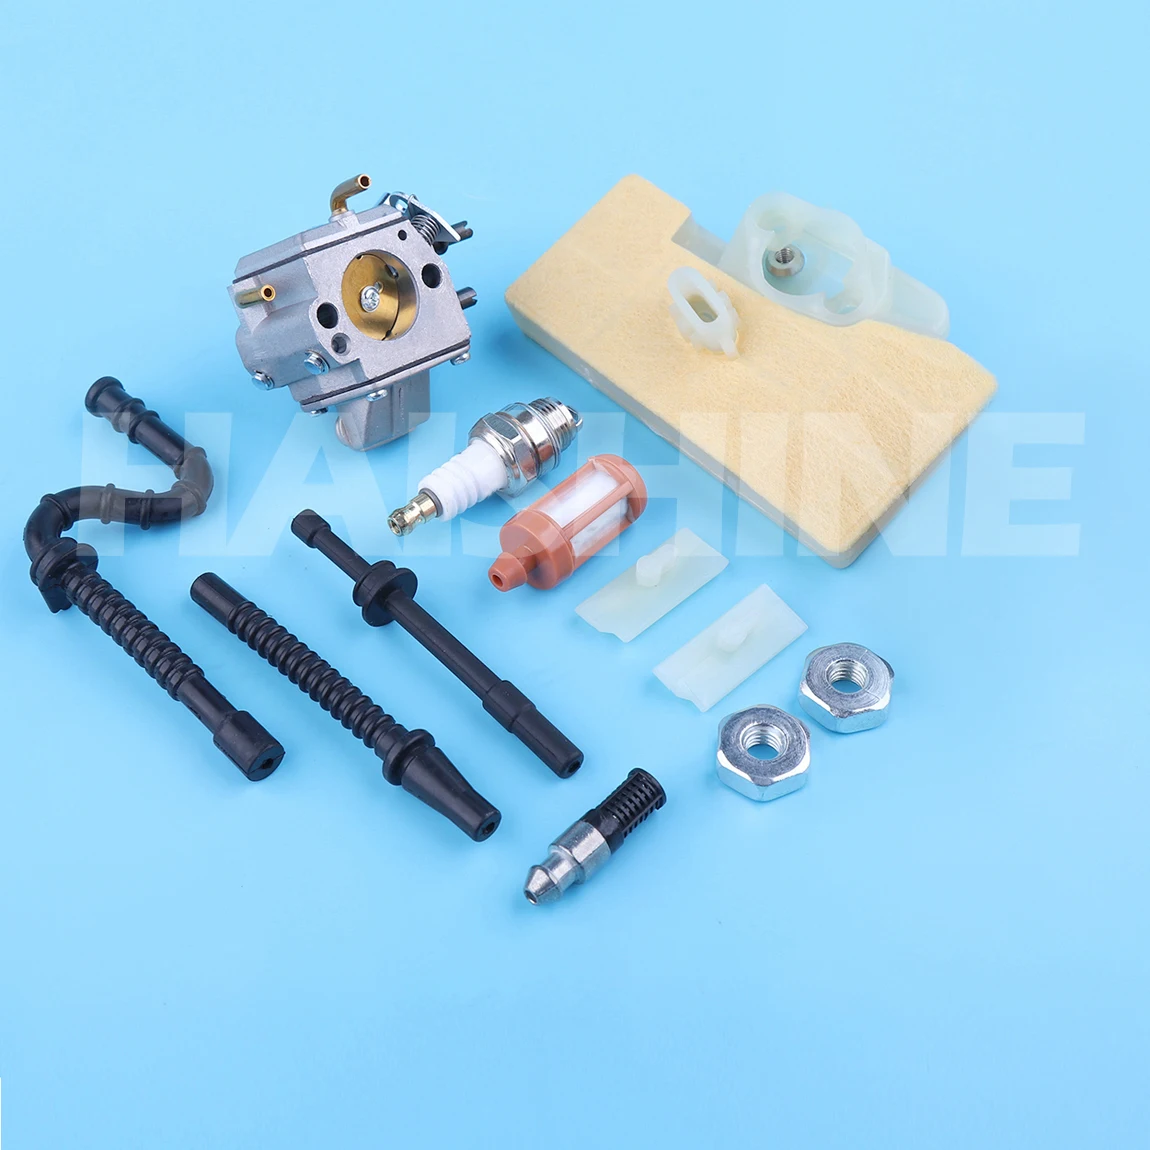 

Carburetor Air Fuel Filter Line Tune Up Kit For Stihl MS290 MS310 MS390 029 039 MS 290 310 390 Chainsaw 1127 120 0650 Carb